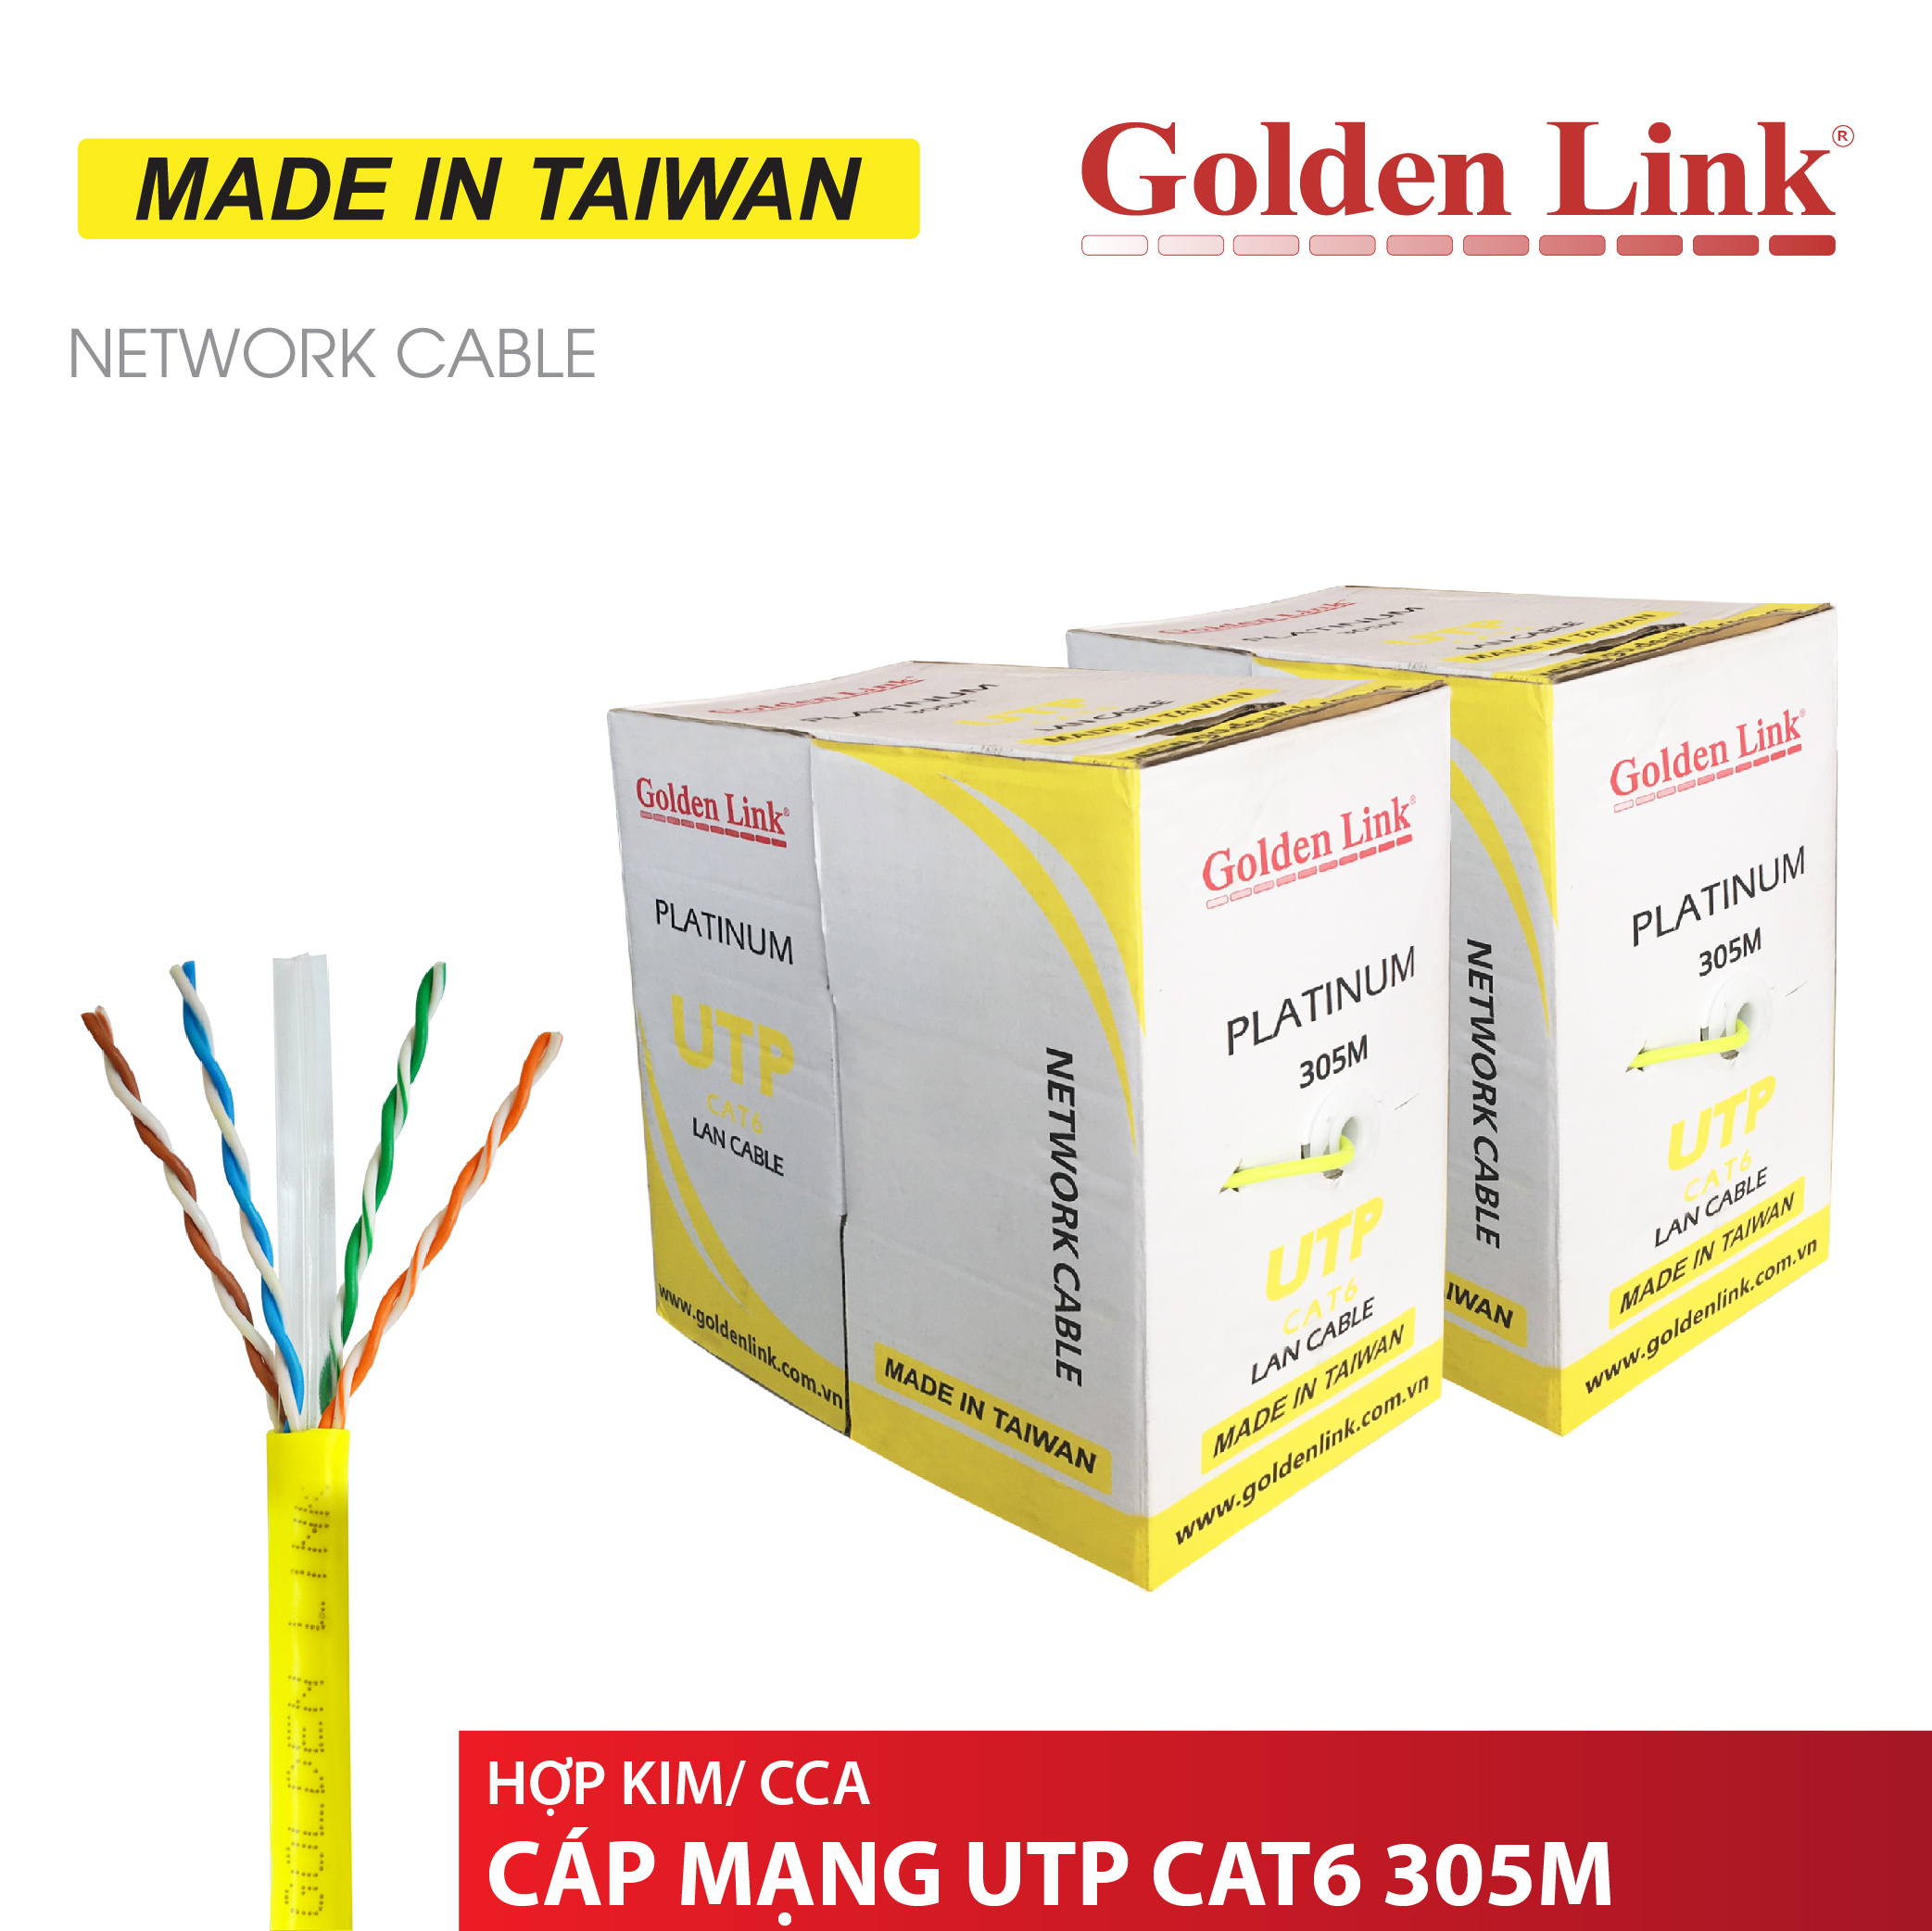 Golden Link Platinum UTP CAT 6 Network Cable Made in Taiwan